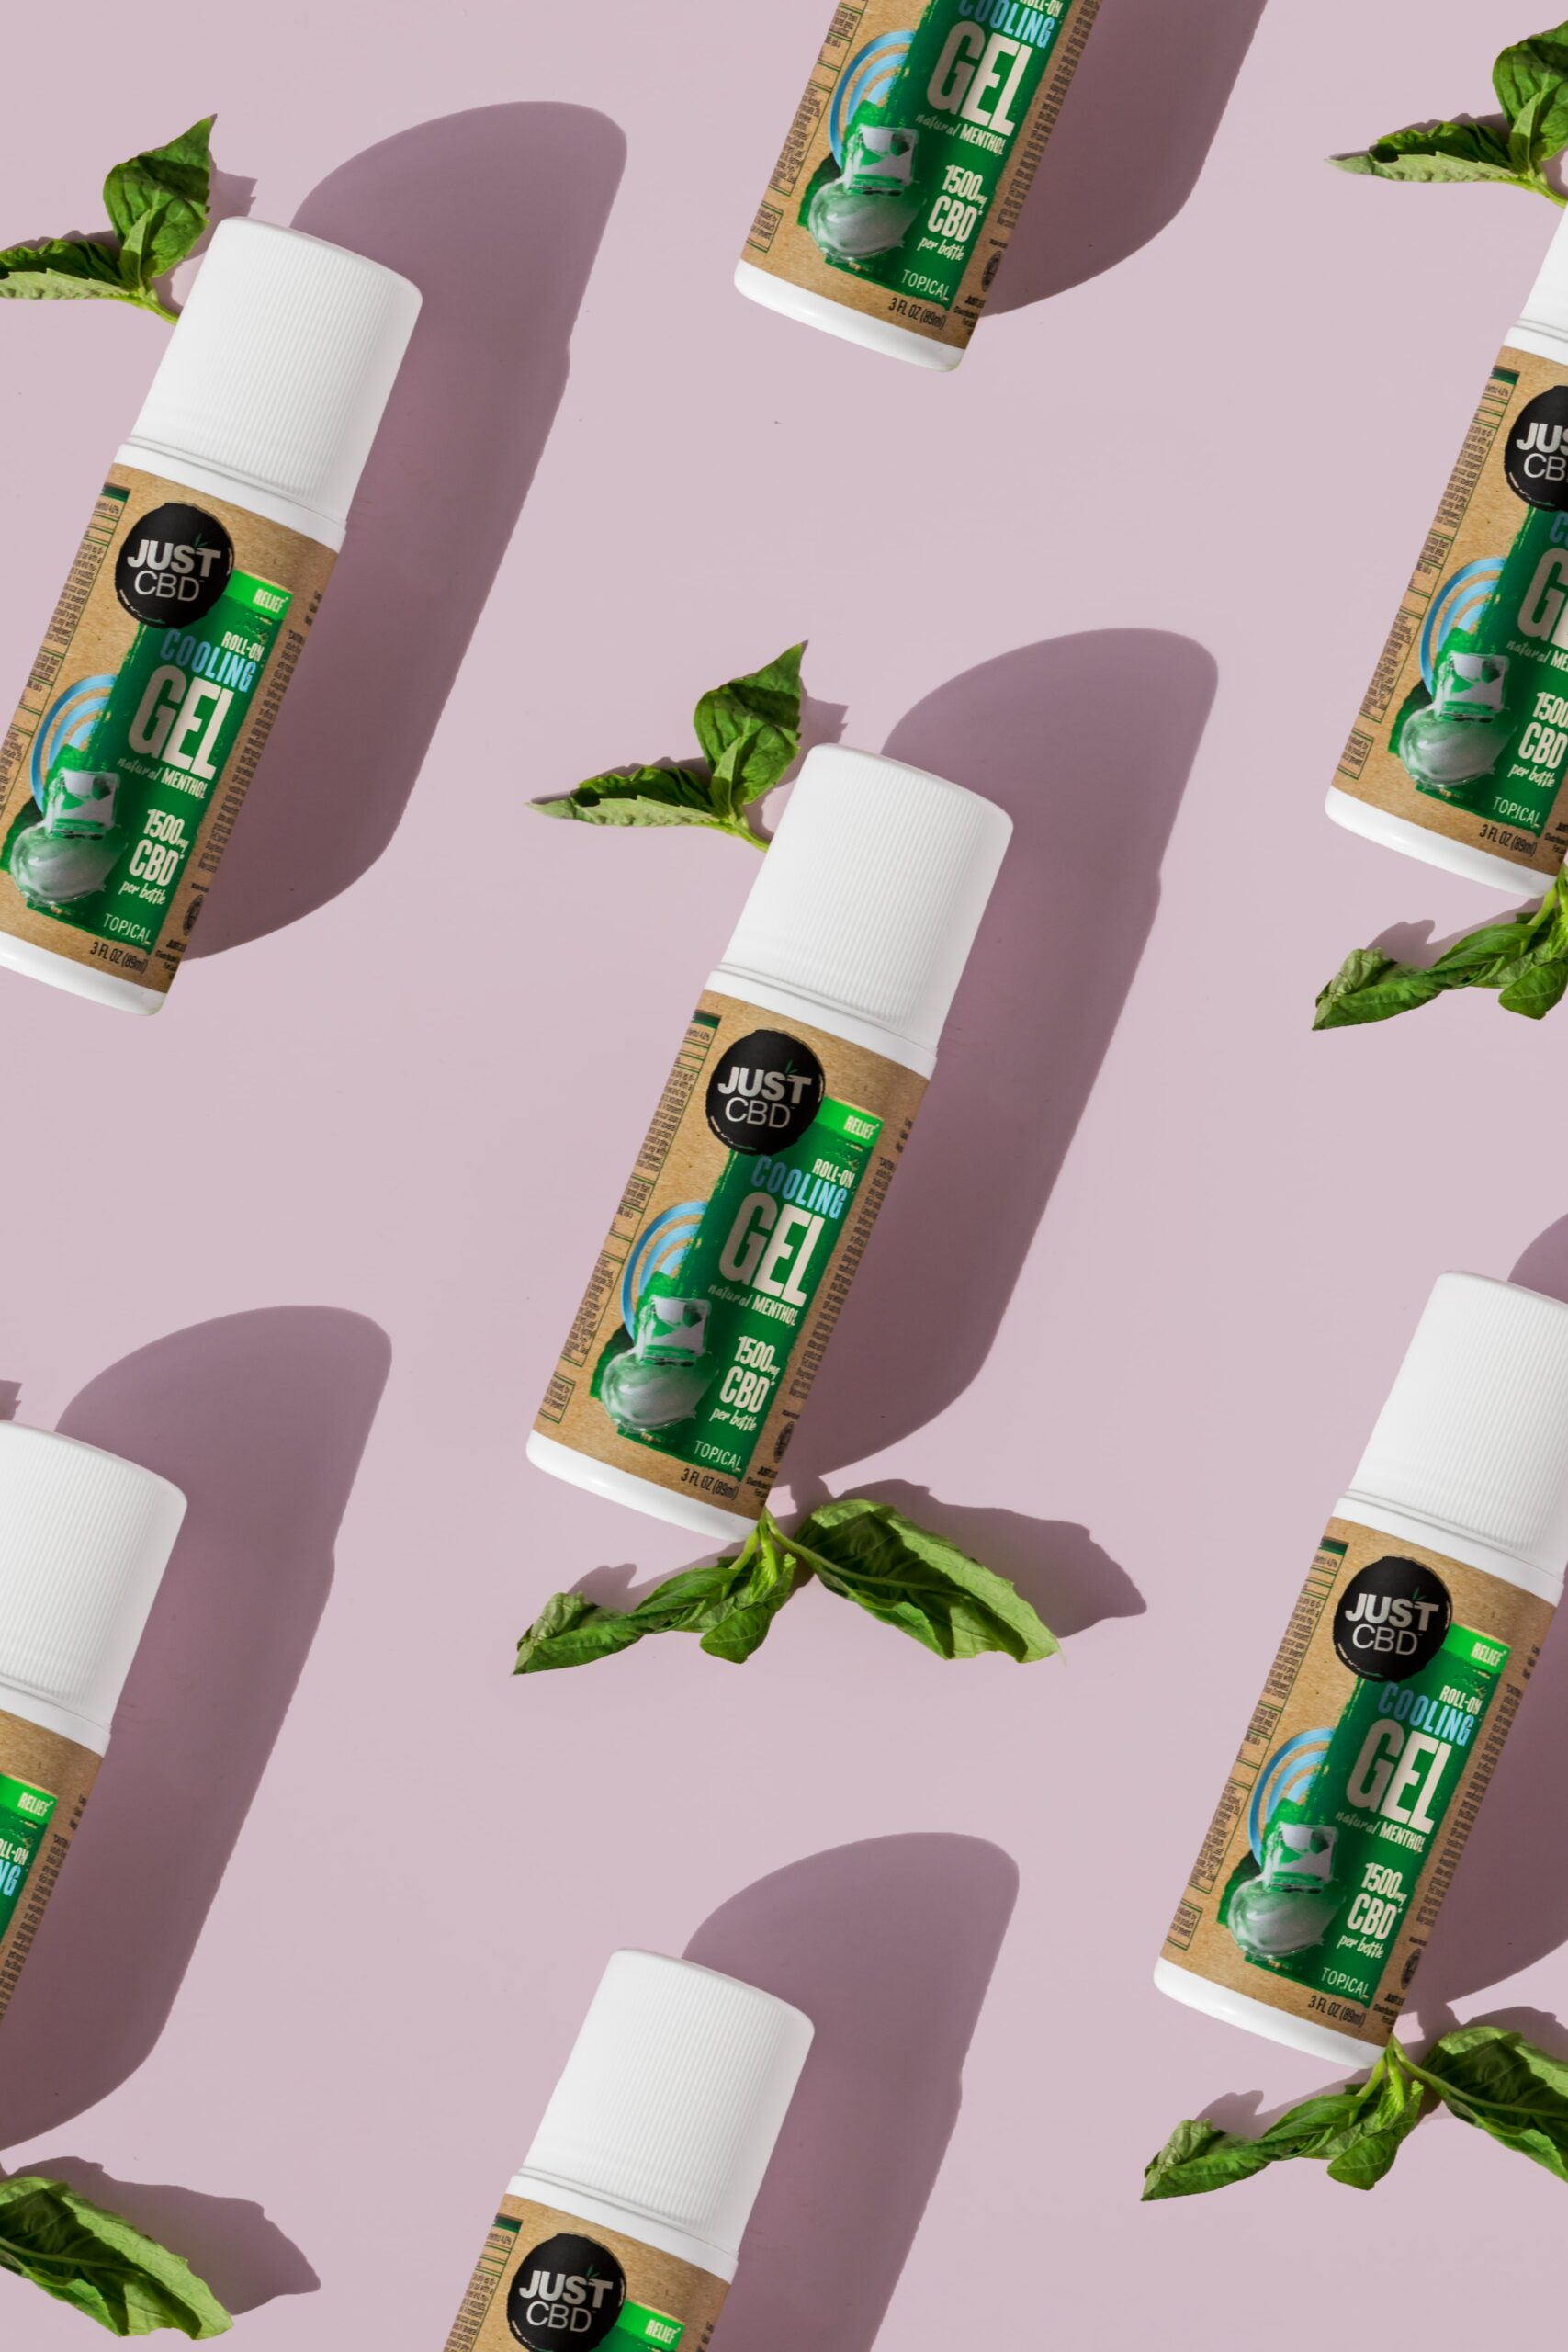 10 CBD TOPICALS YOUR SKIN WILL LOVE